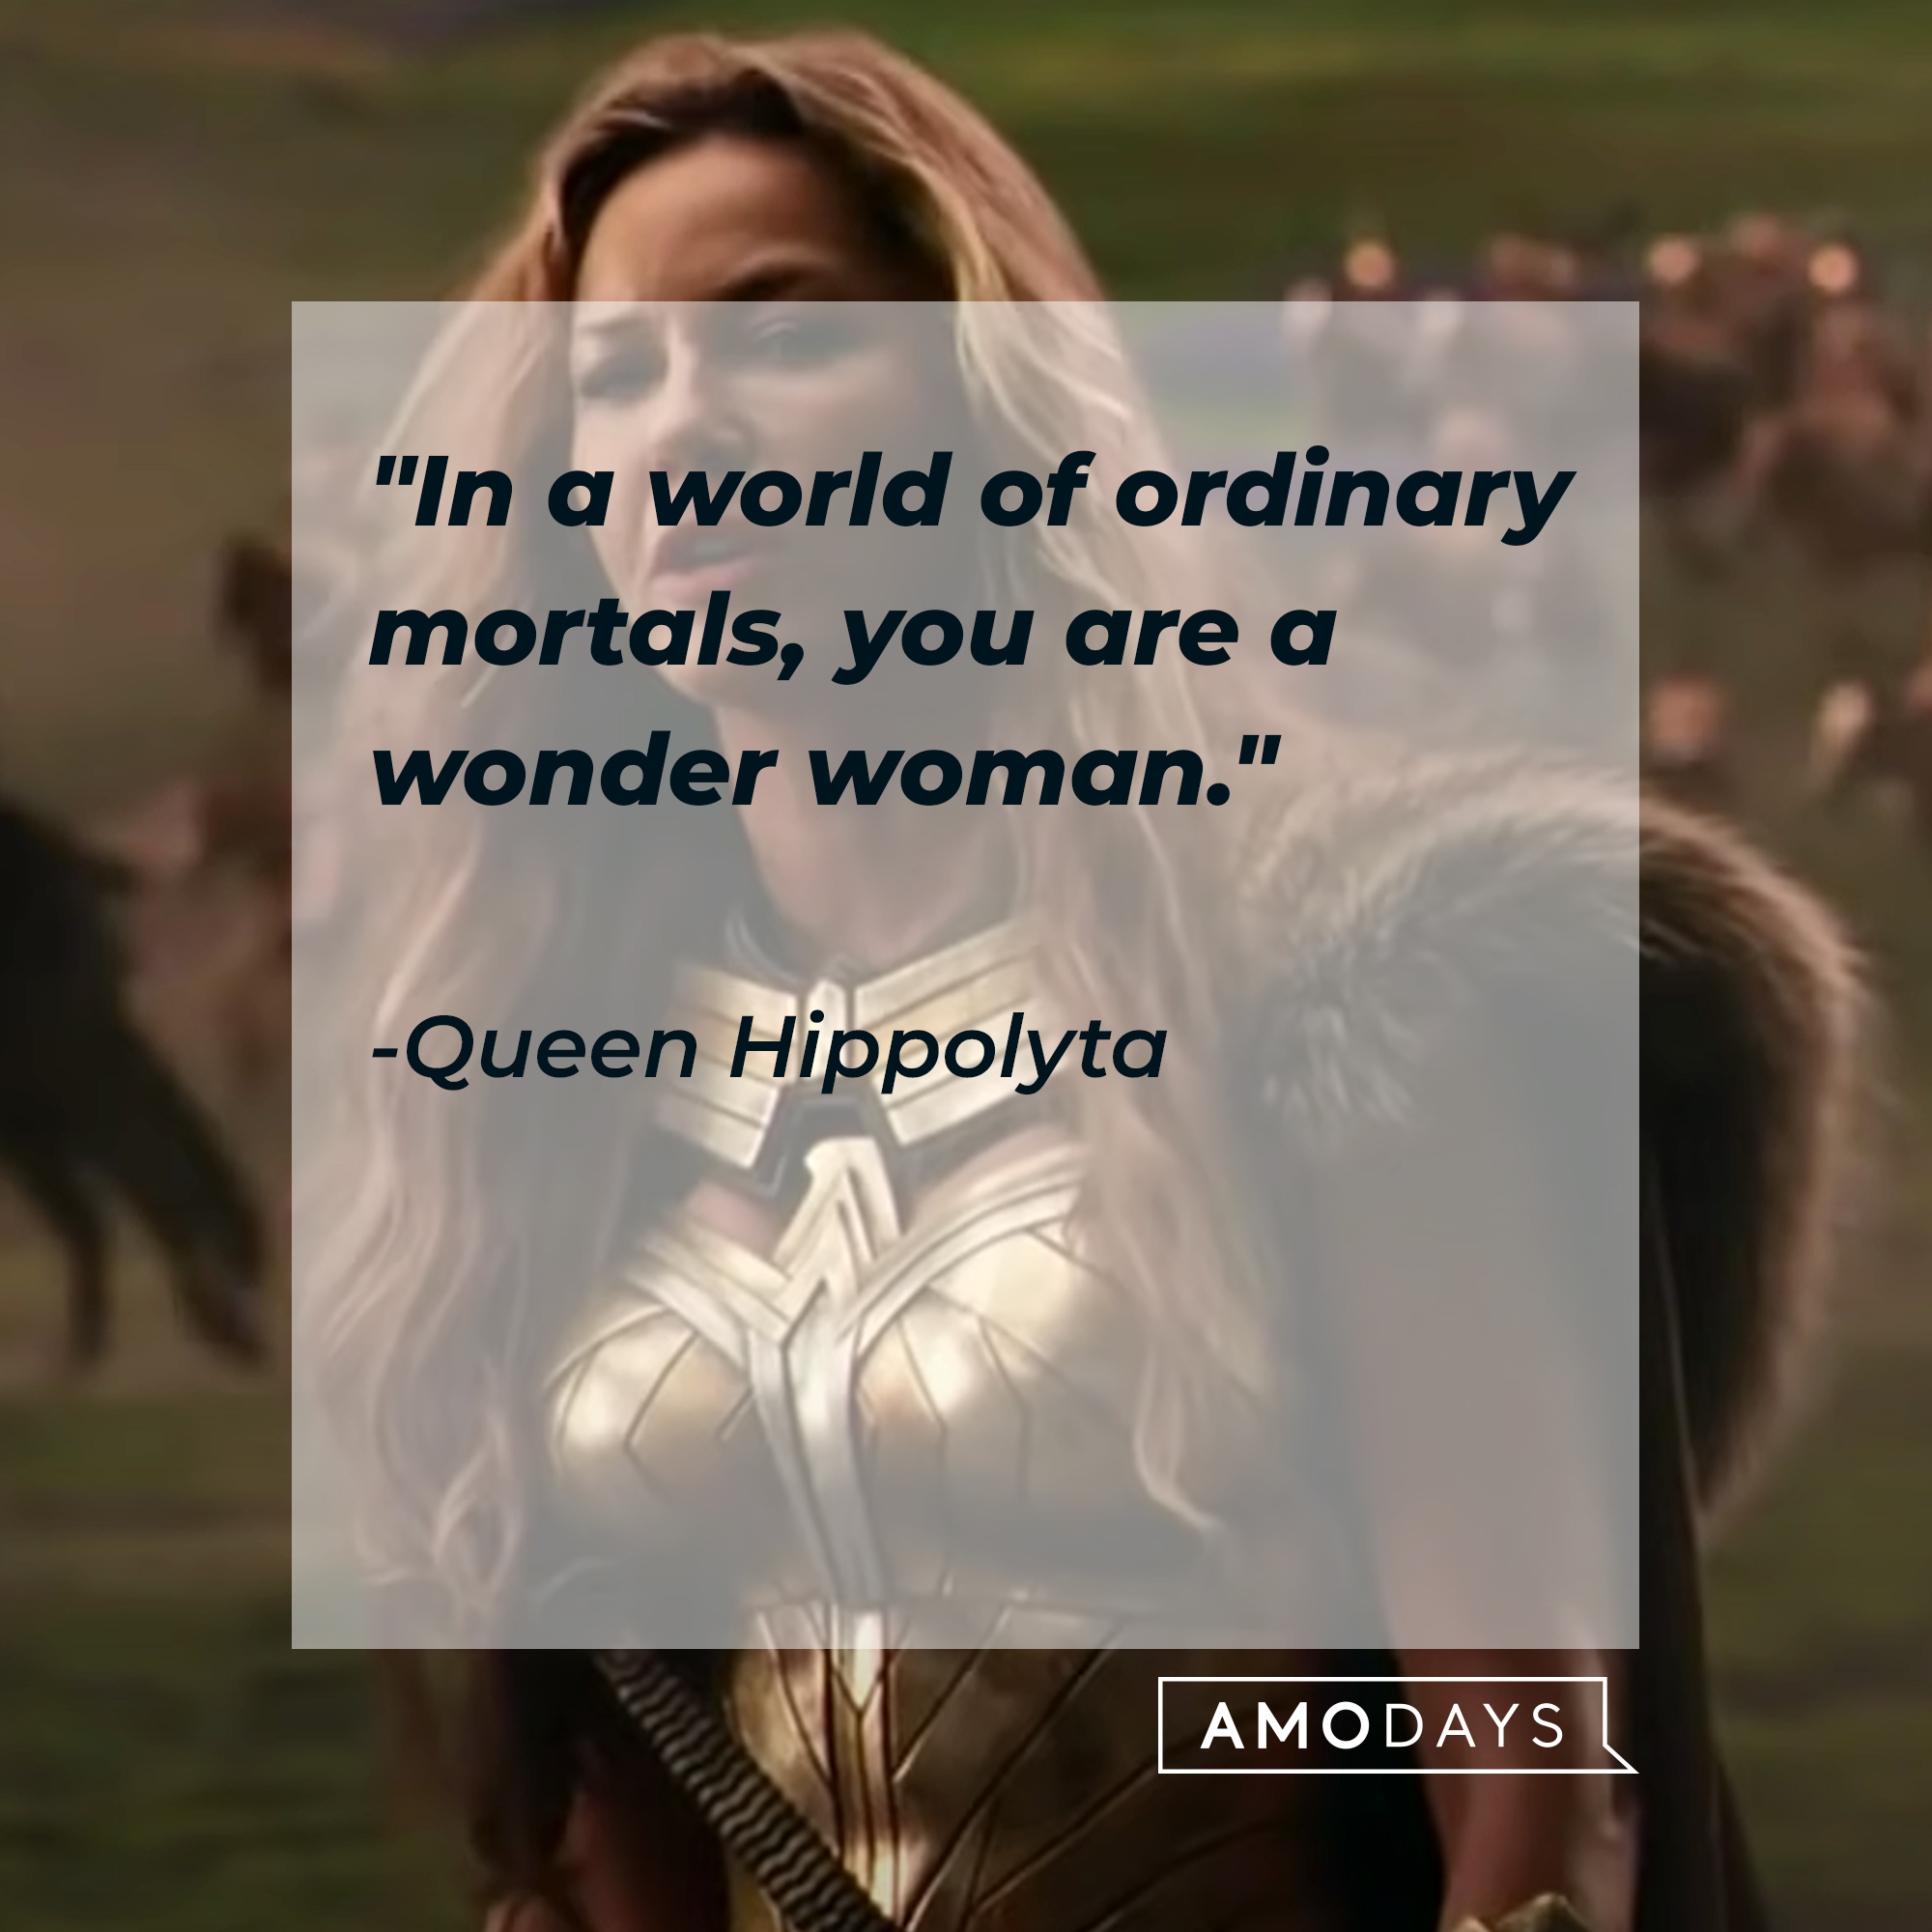 Queen Hippolyta's quote: "In a world of ordinary mortals, you are a wonder woman." | Source: facebook.com/dc